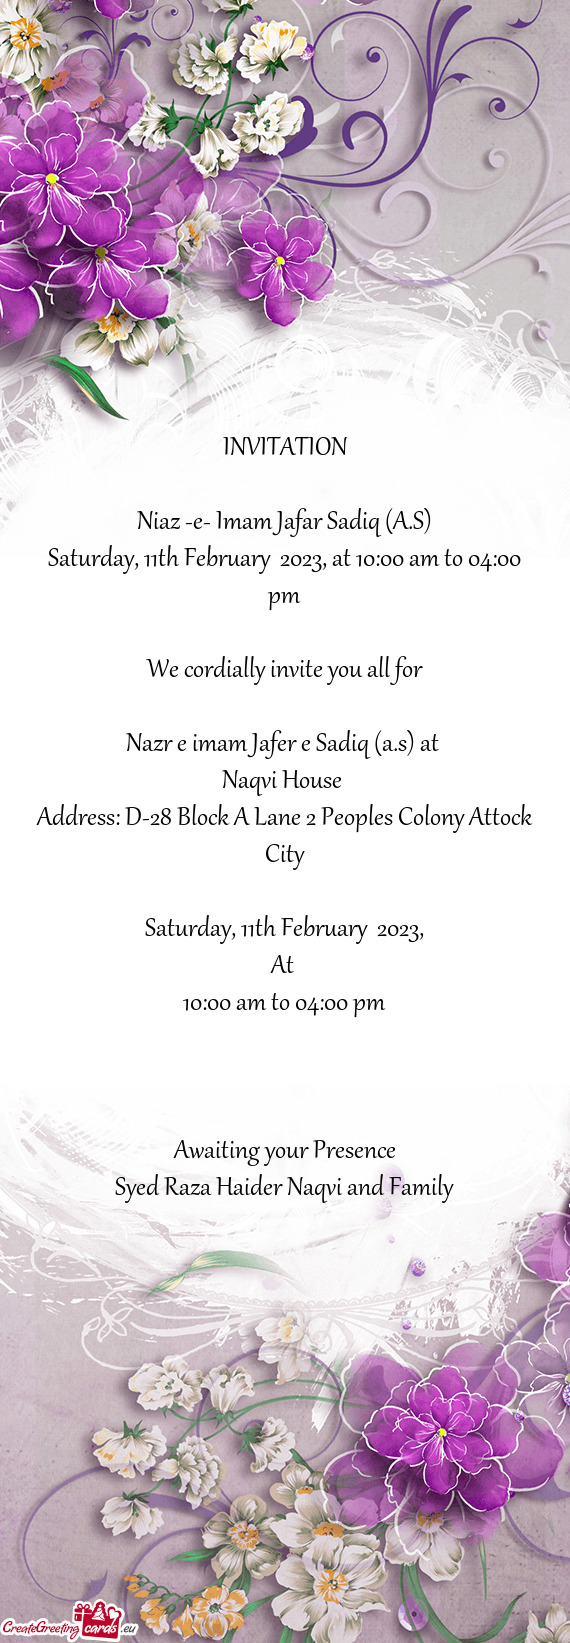 Saturday, 11th February 2023, at 10:00 am to 04:00 pm